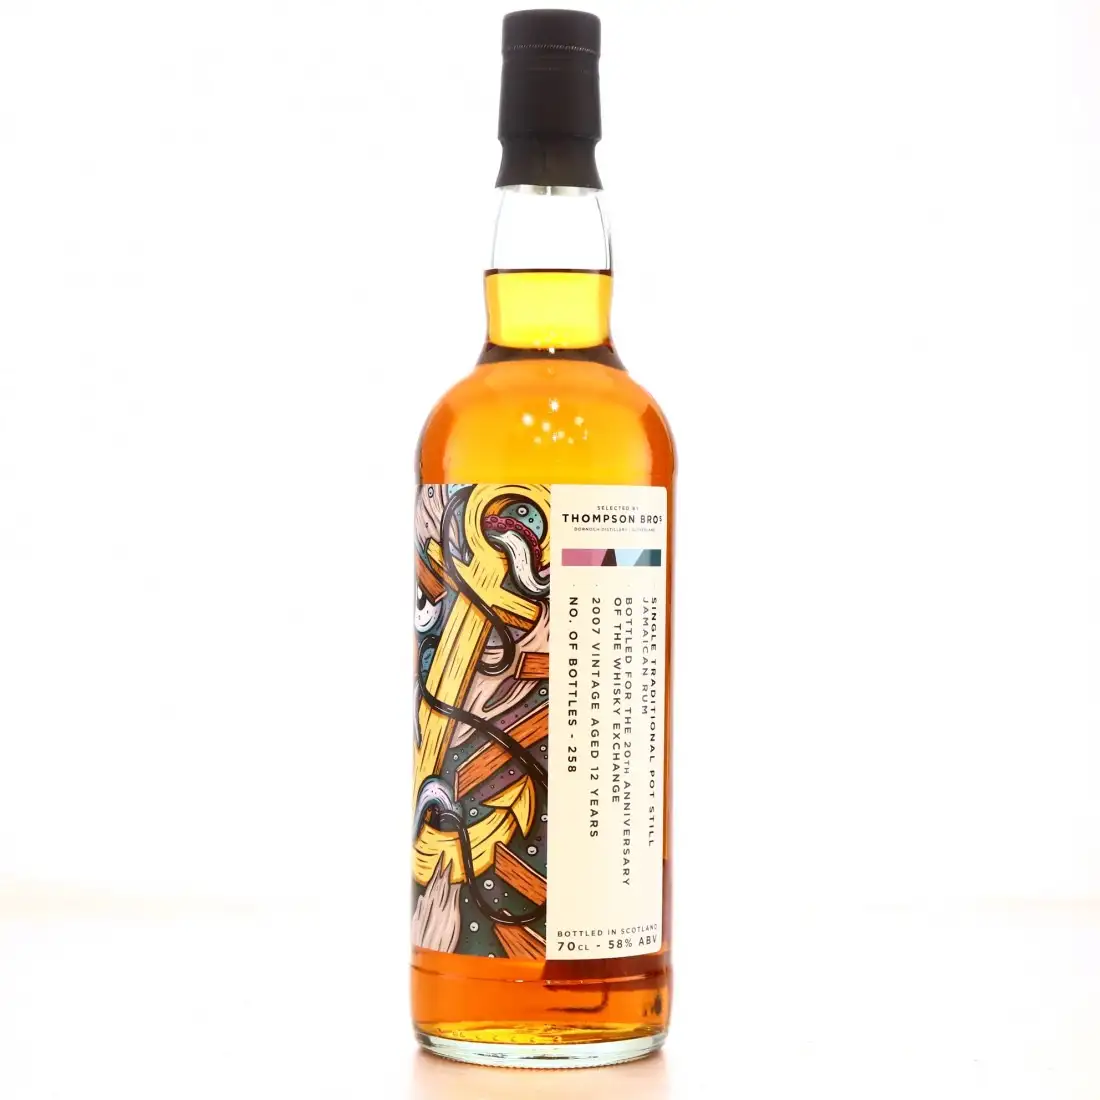 Image of the front of the bottle of the rum The Whisky Exchange